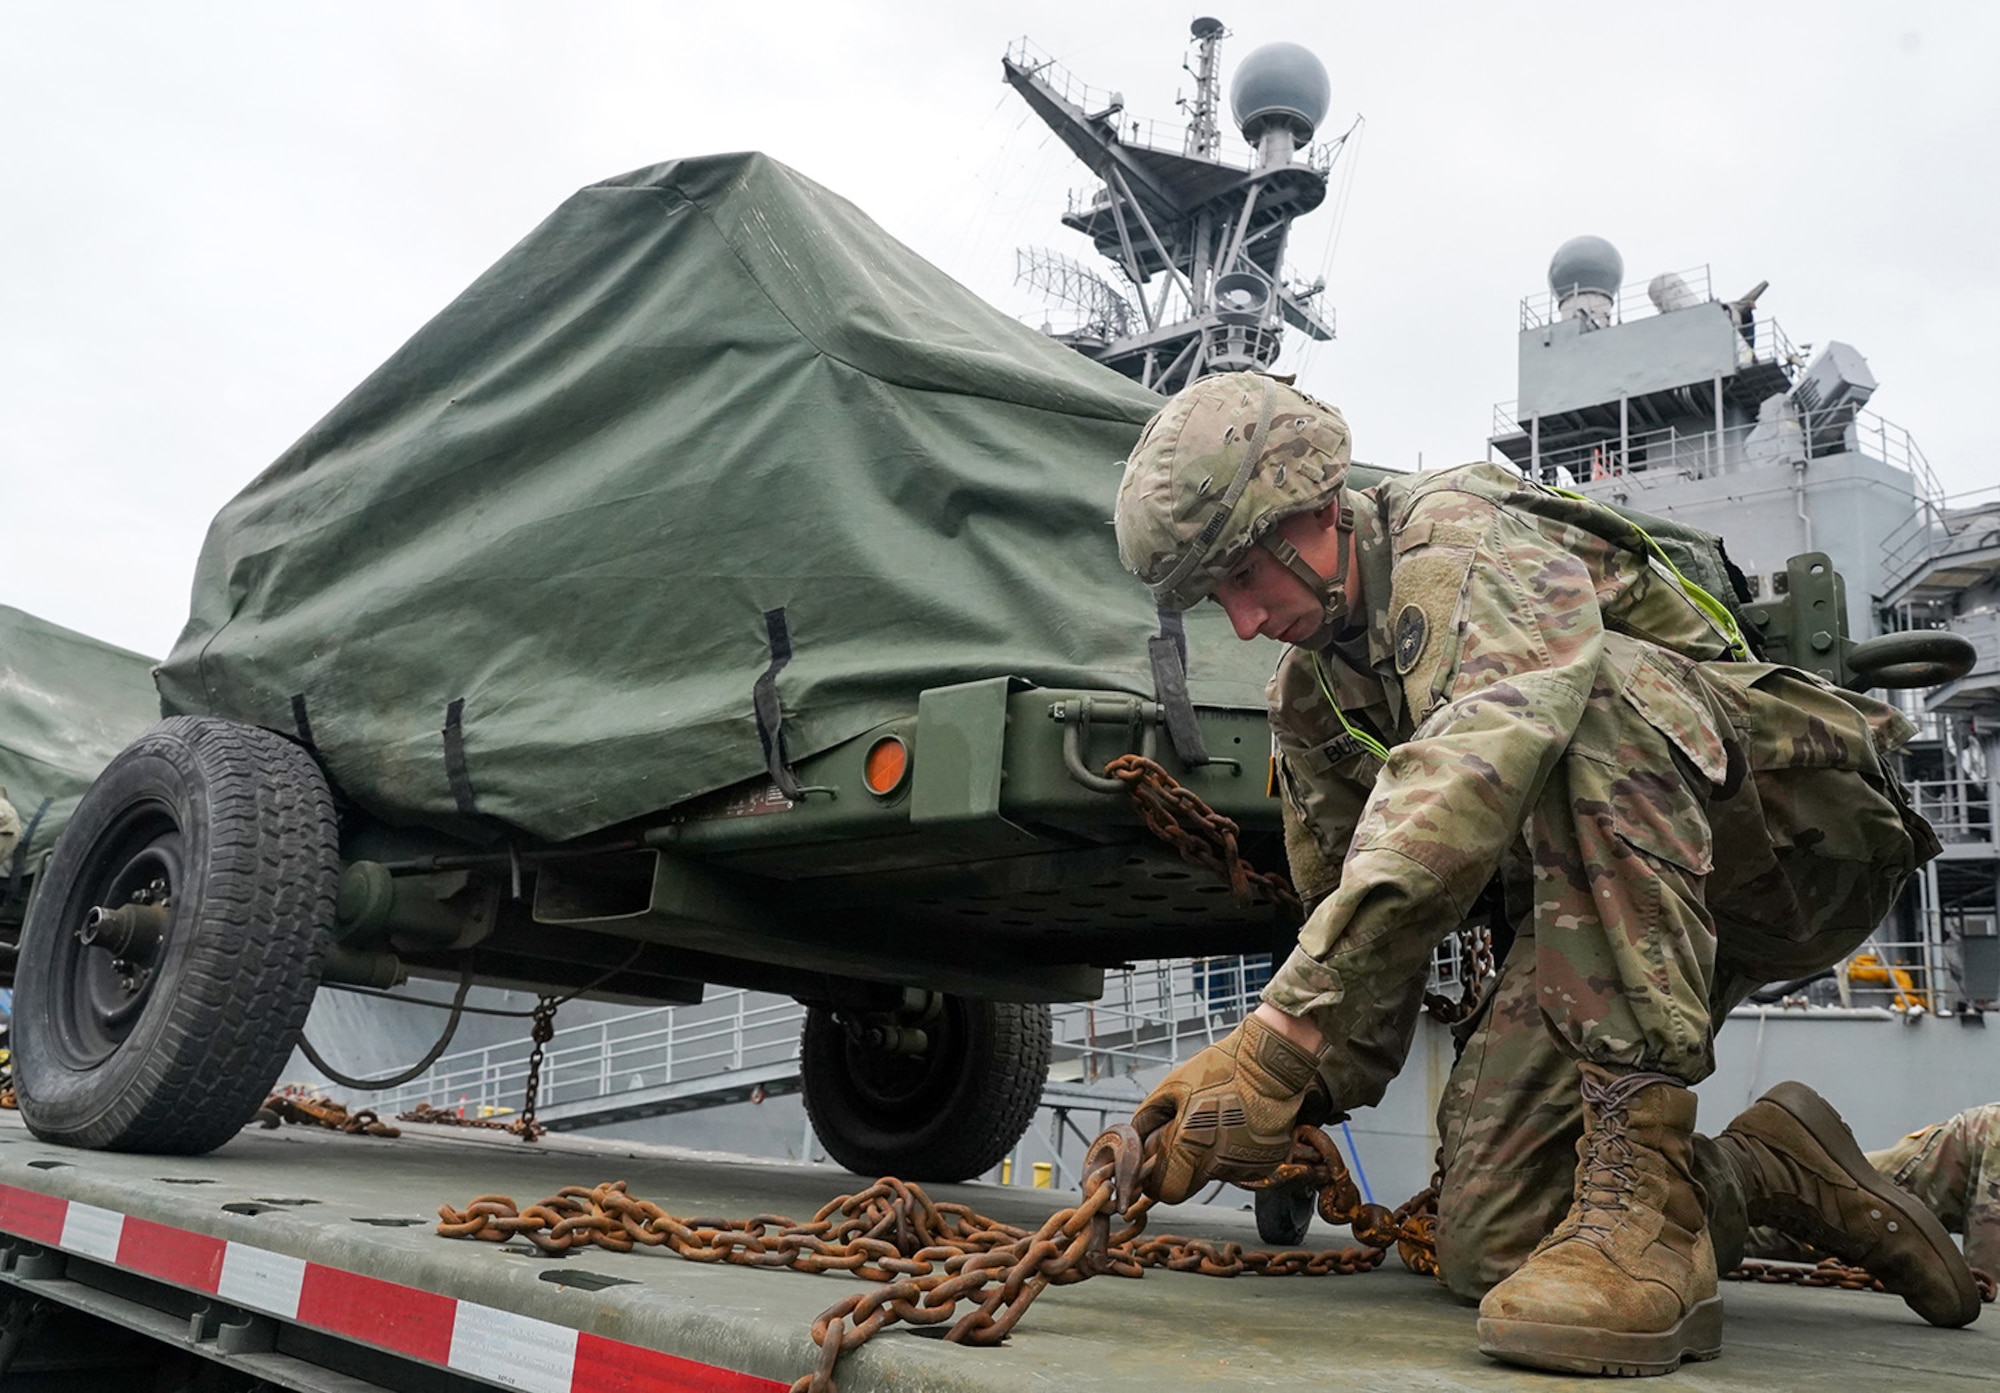 Specialist Timothy Burns, assigned to the 109th Transportation Company, 17th Combat Support Sustainment Battalion, U.S. Army Alaska, secures U.S. Marine Corps bulk fuel supplies and equipment from the U.S.S. Comstock (LSD-45), a Whidbey Island-class dock landing ship, to an M872 trailer at the port of Seward, Alaska, Sept. 19, 2019, for transport to Joint Base Elmendorf-Richardson, Alaska. The U.S. Navy is conducting an Arctic Expeditionary Capabilities Exercise to test its logistical effectiveness and joint-service interoperability while responding to conflict or disaster in an austere environment with no organic assets.